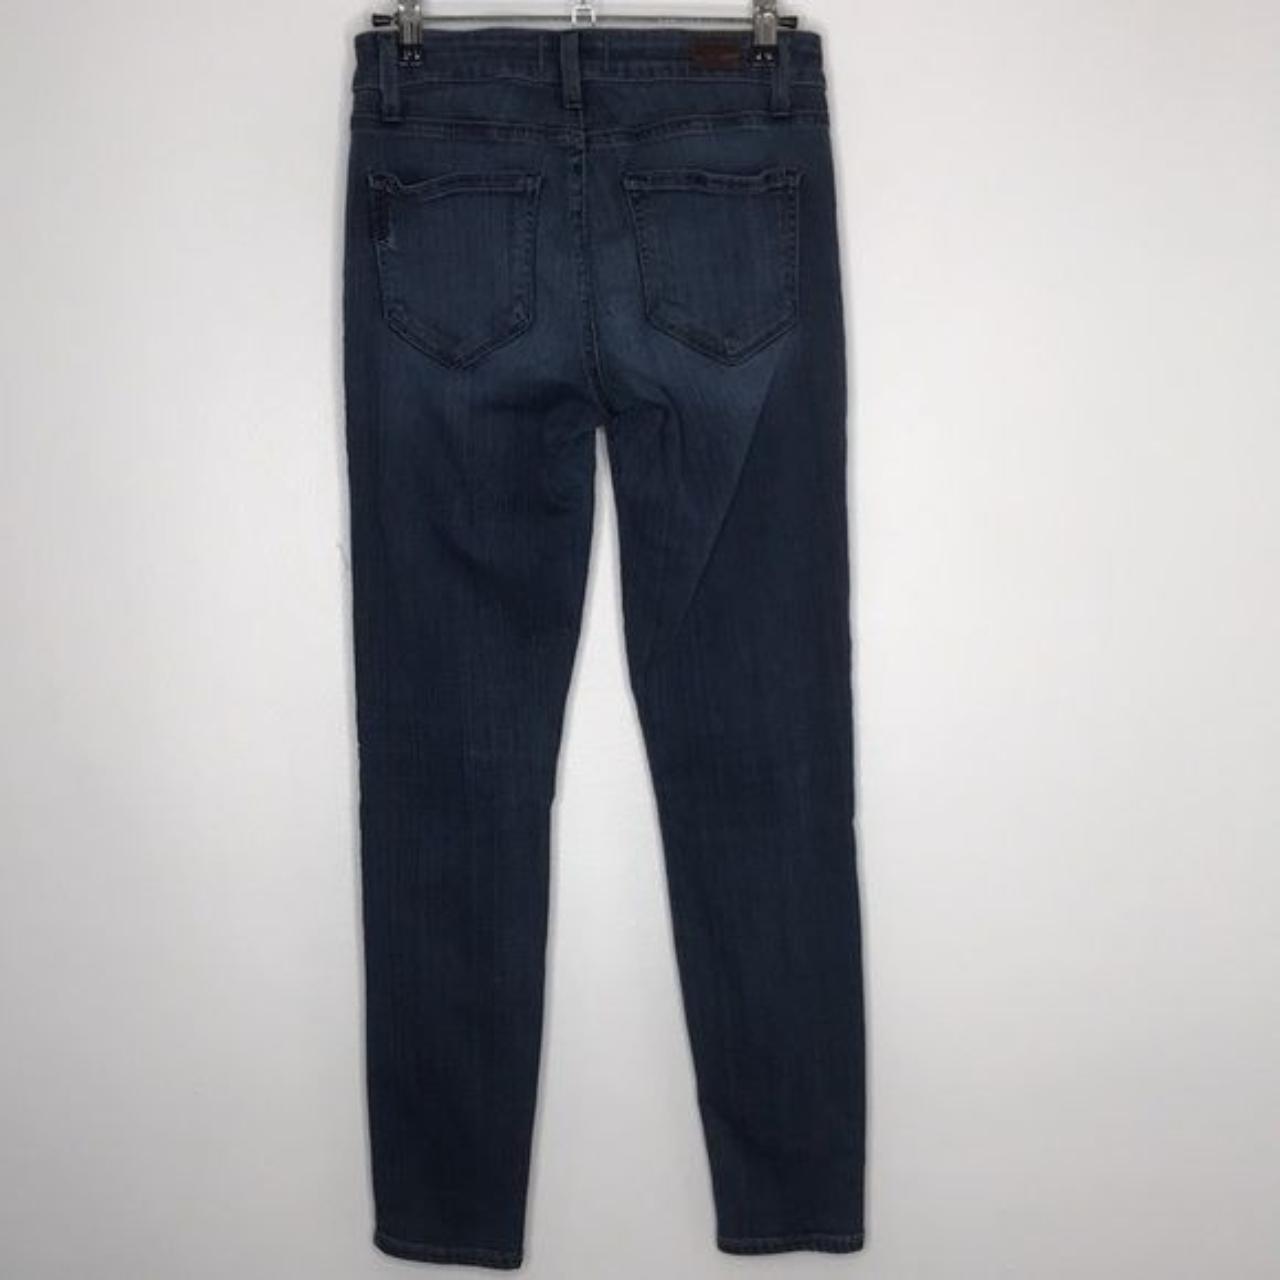 Product Image 3 - PAIGE Verdugo Ankle Skinny Jeans